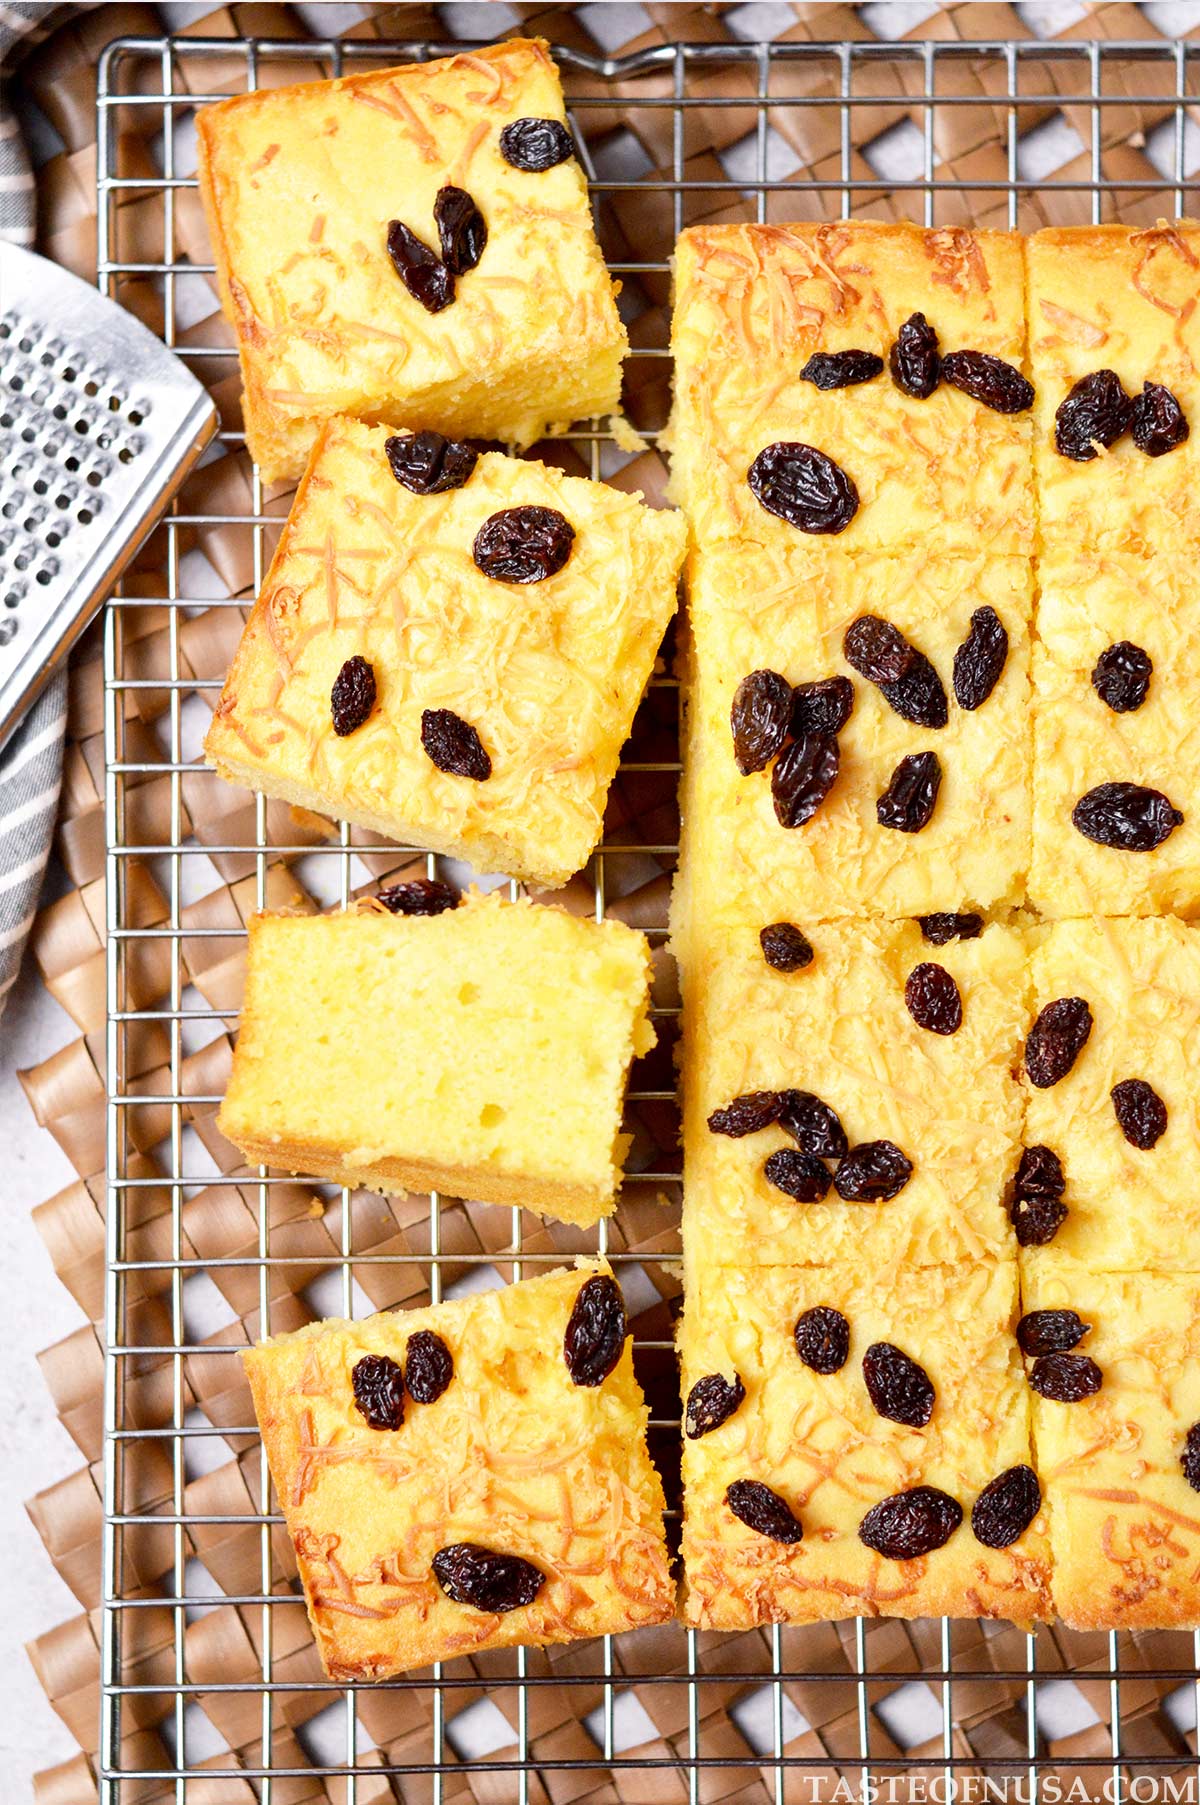 cassava tapai cake (bolu tape) with grated cheddar cheese and raisins